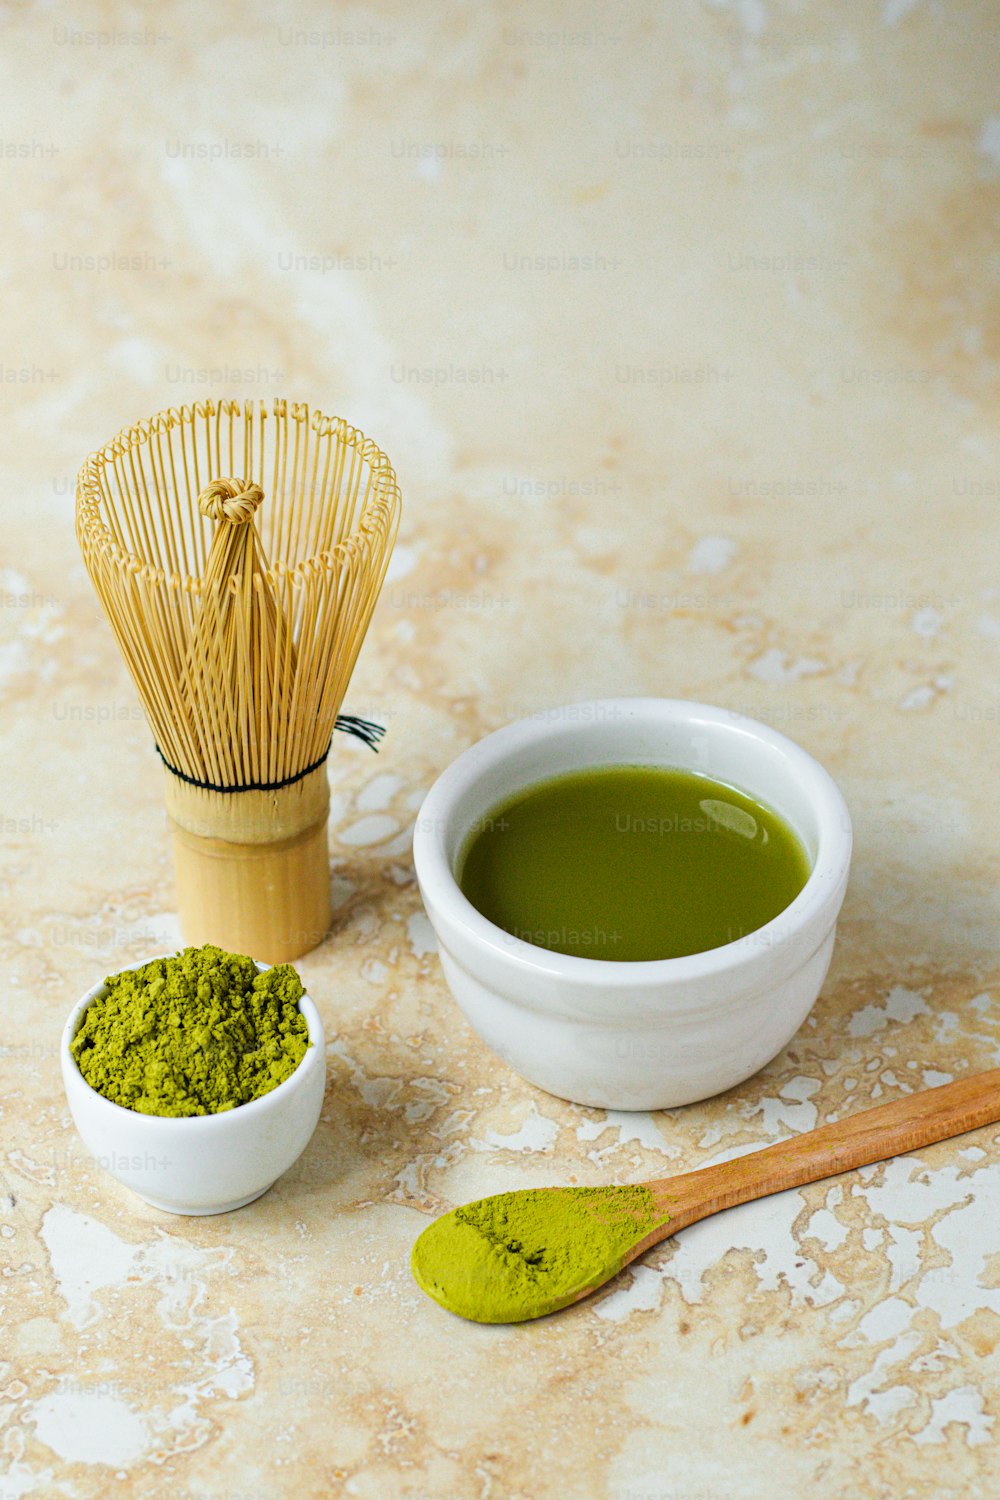 a bowl of green tea next to a whisk and spoon